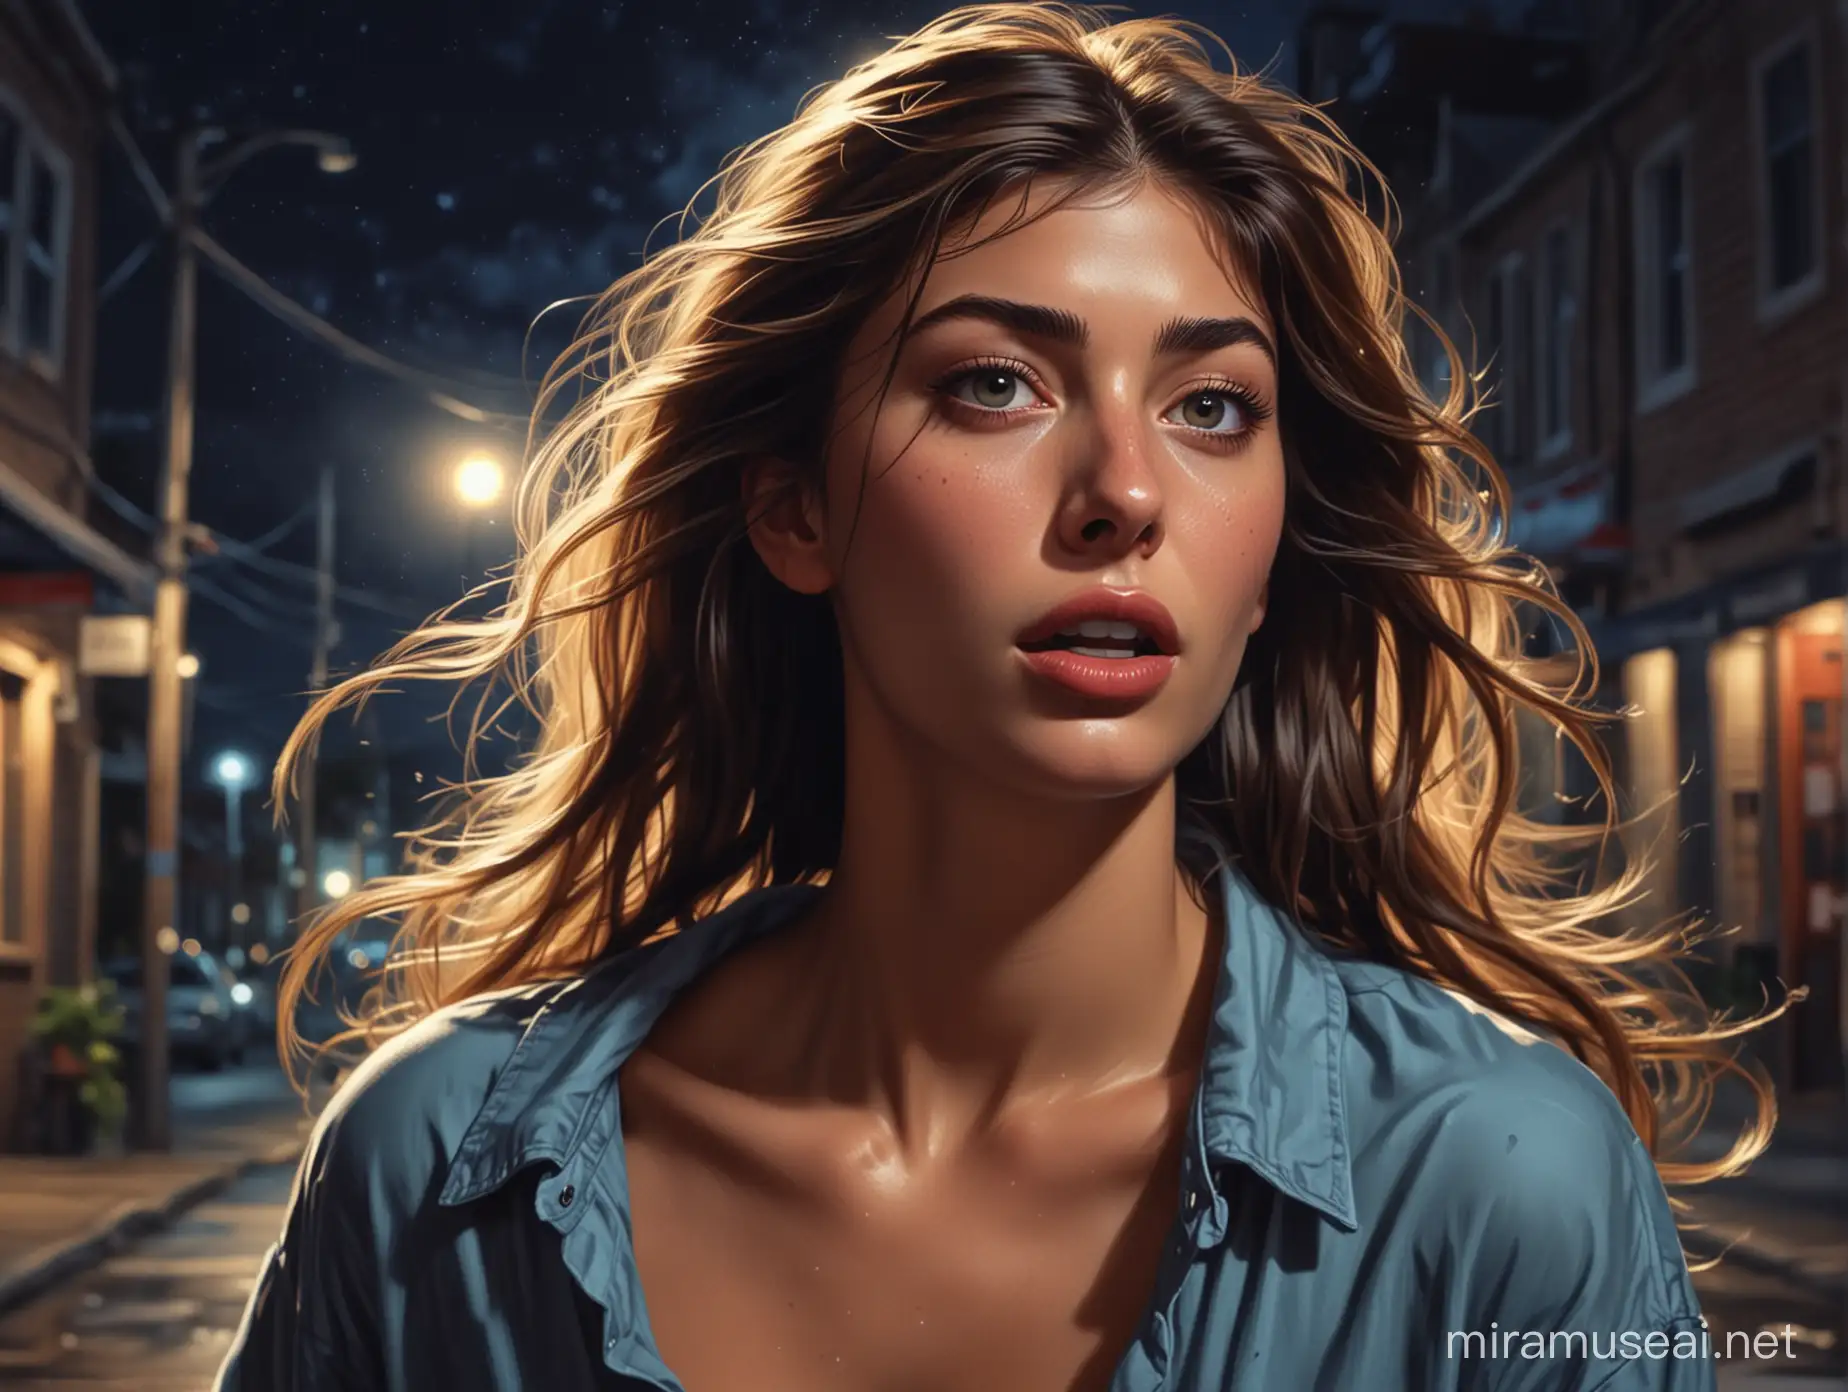 Marvel Comic Style Portrait Astonished Camila Morrone Running in a Small Town at Night